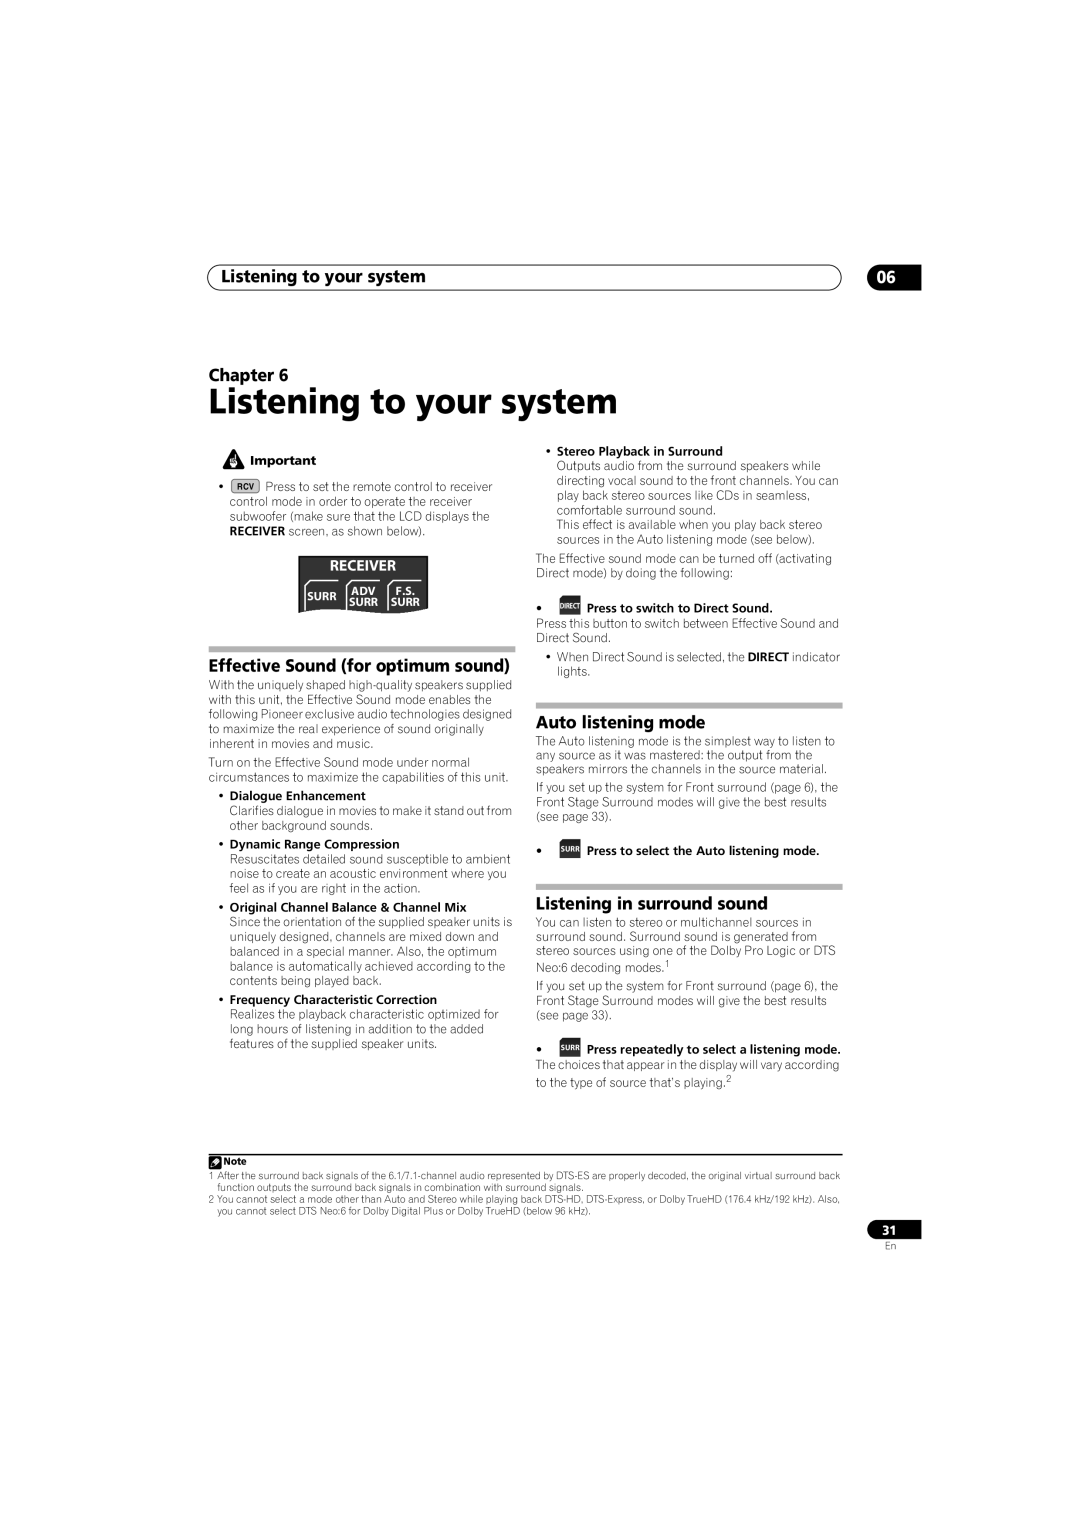 Pioneer SX-LX70SW Listening to your system, Effective Sound for optimum sound, Auto listening mode, Chapter, Receiver 